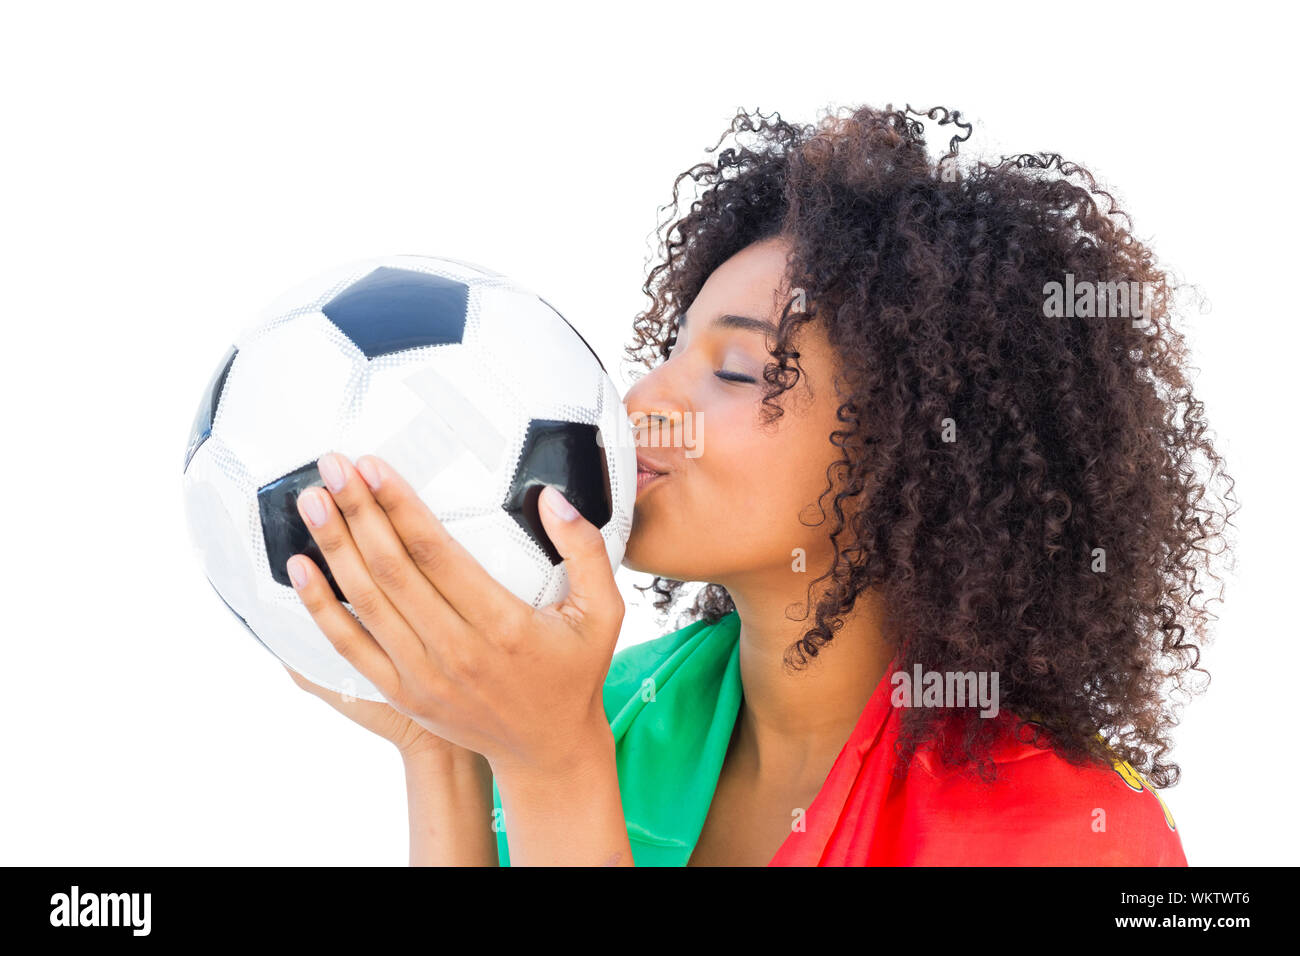 Pretty football fan with portugal flag kissing ball on white background Stock Photo